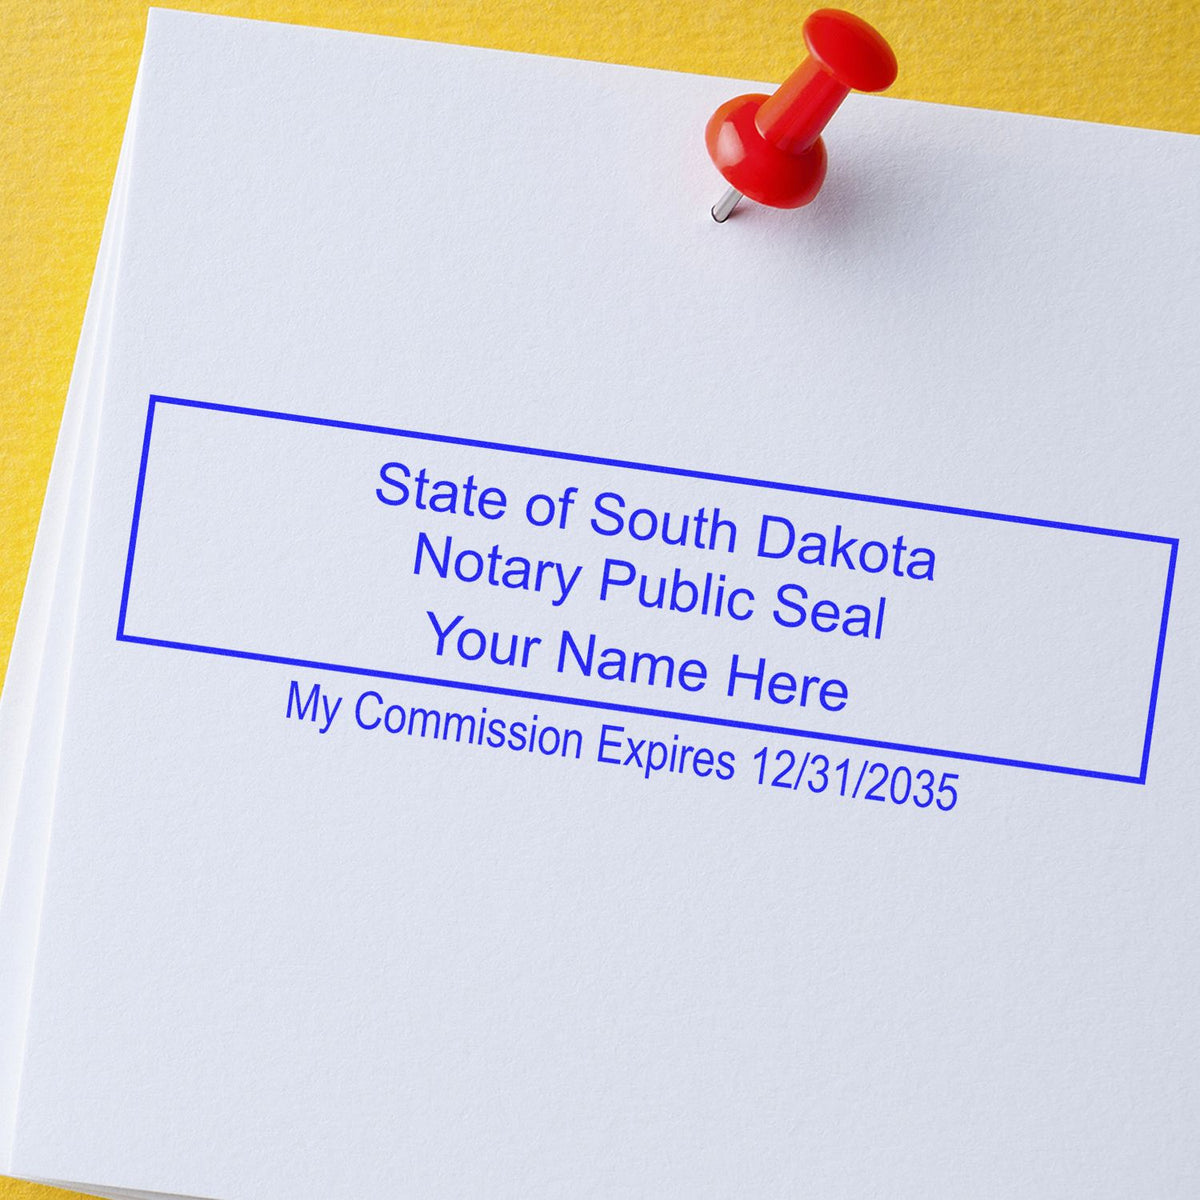 An alternative view of the Super Slim South Dakota Notary Public Stamp stamped on a sheet of paper showing the image in use